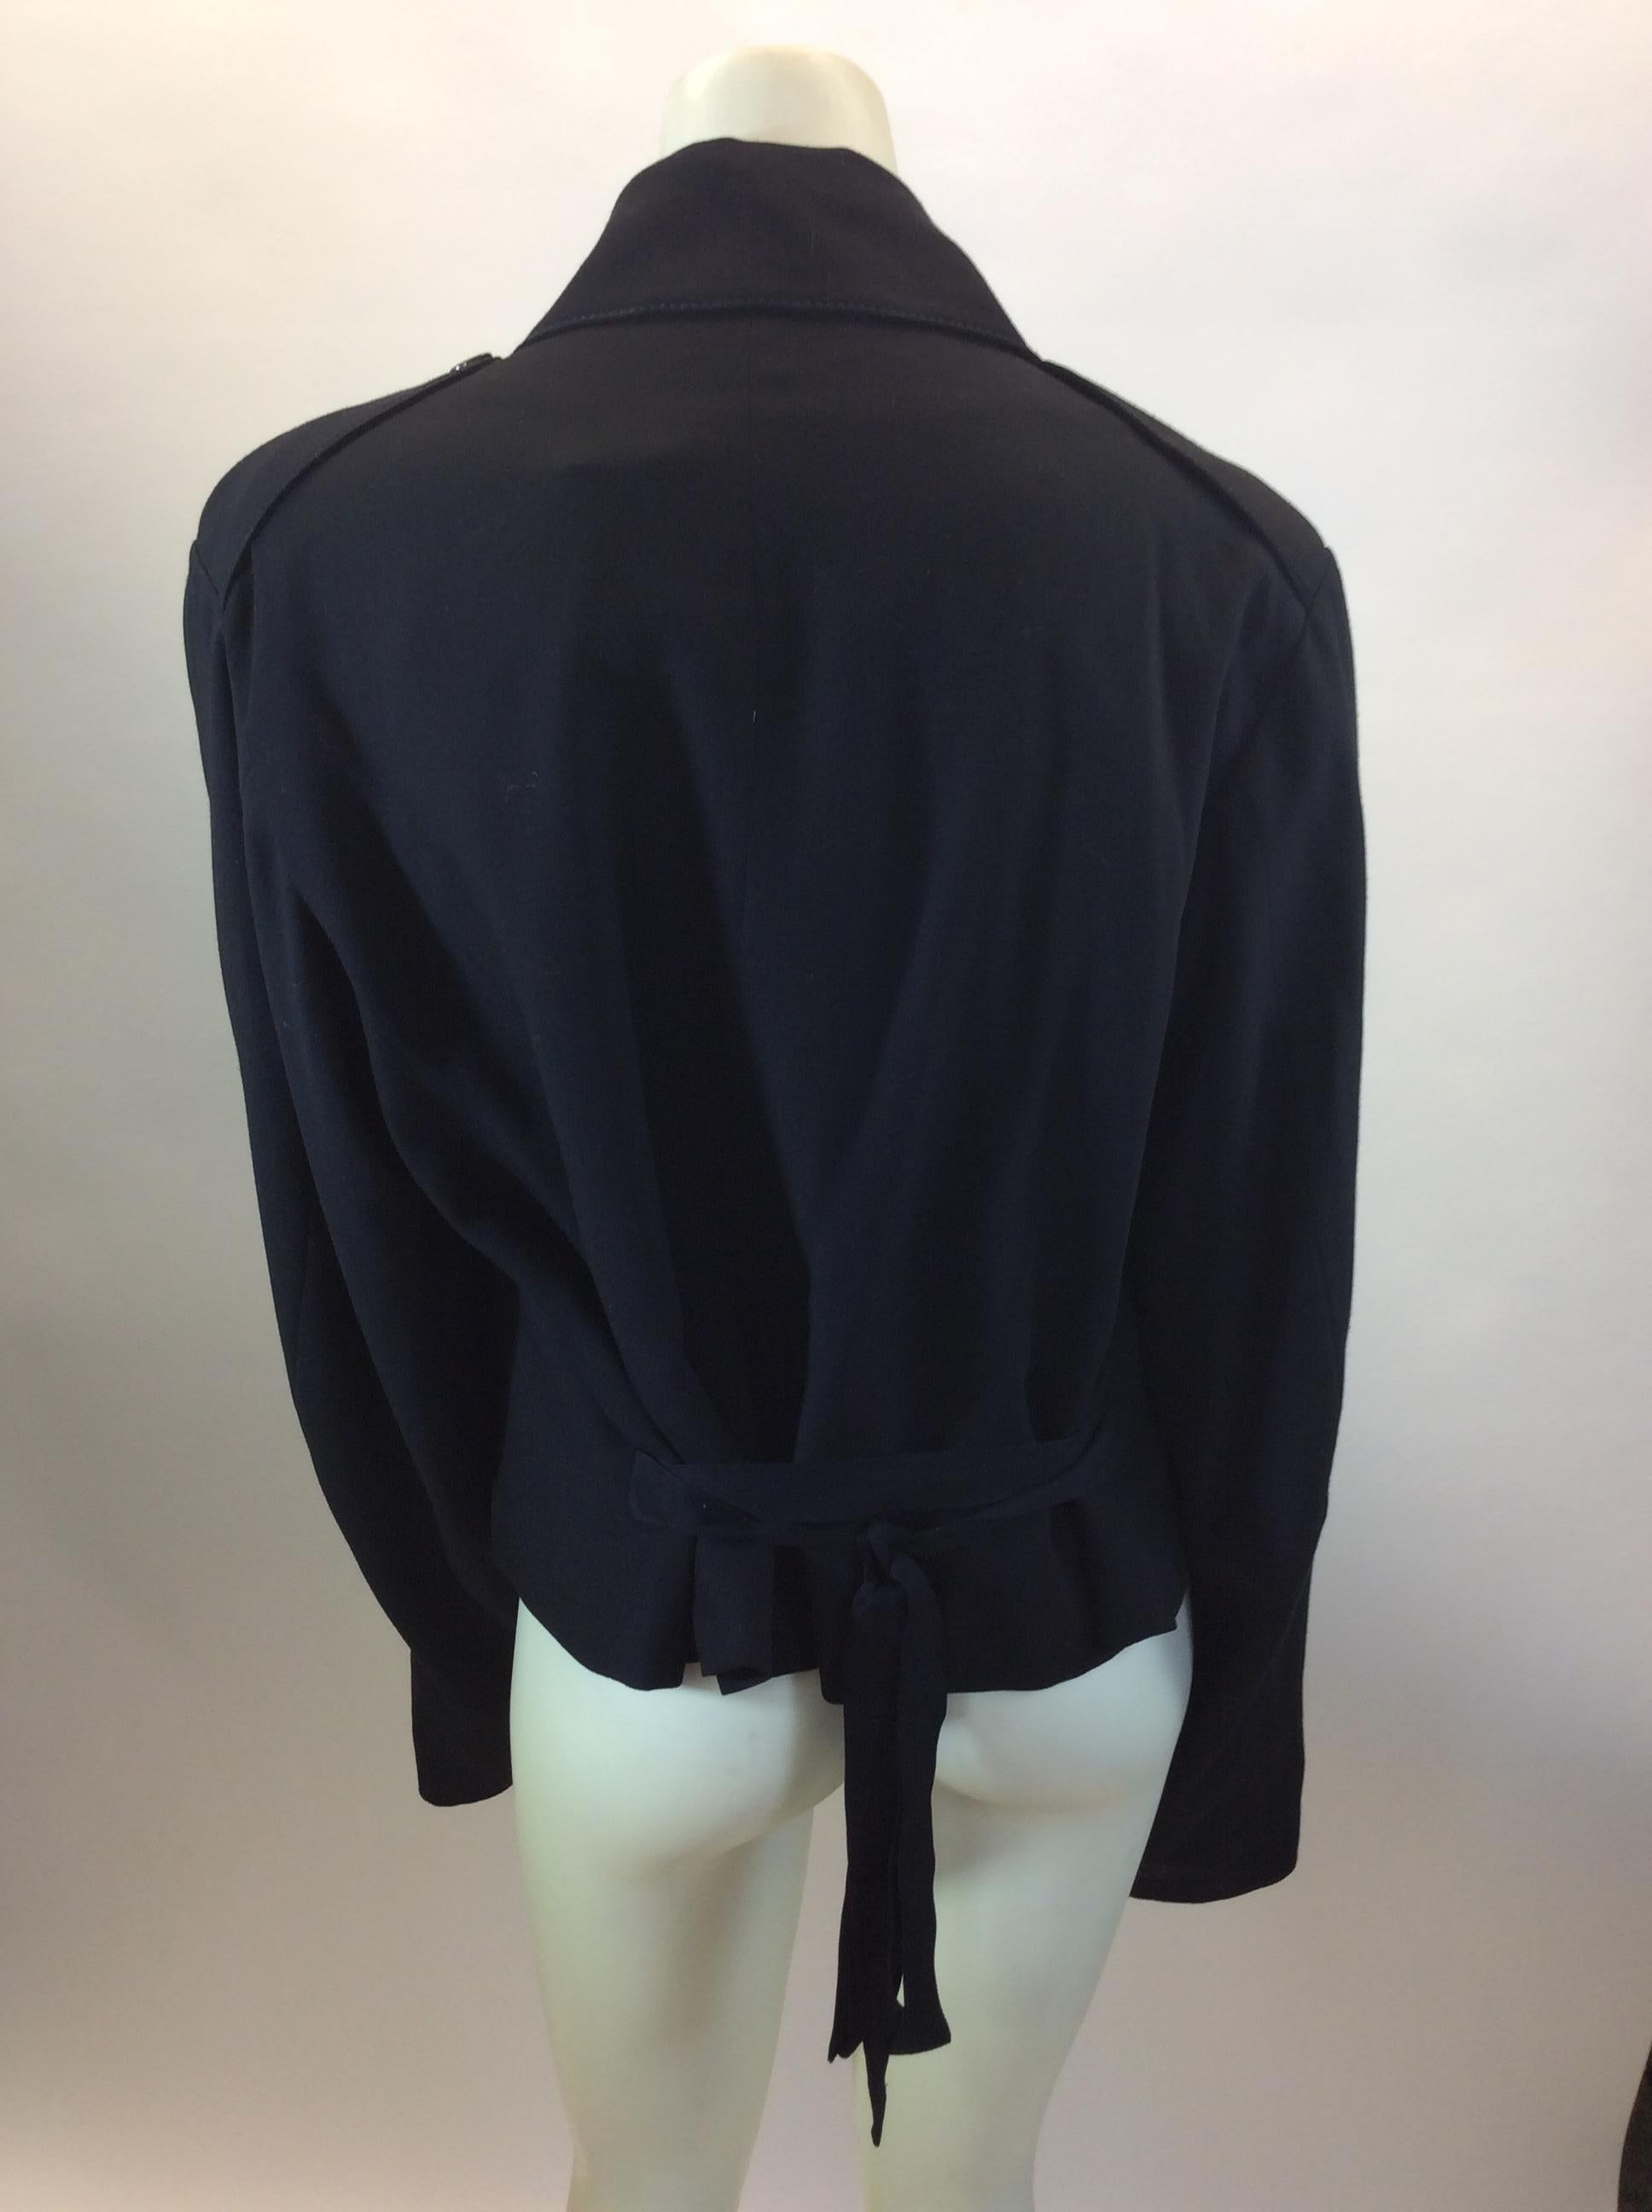 Ann Demeulemeester Black Wool Jacket In Good Condition For Sale In Narberth, PA